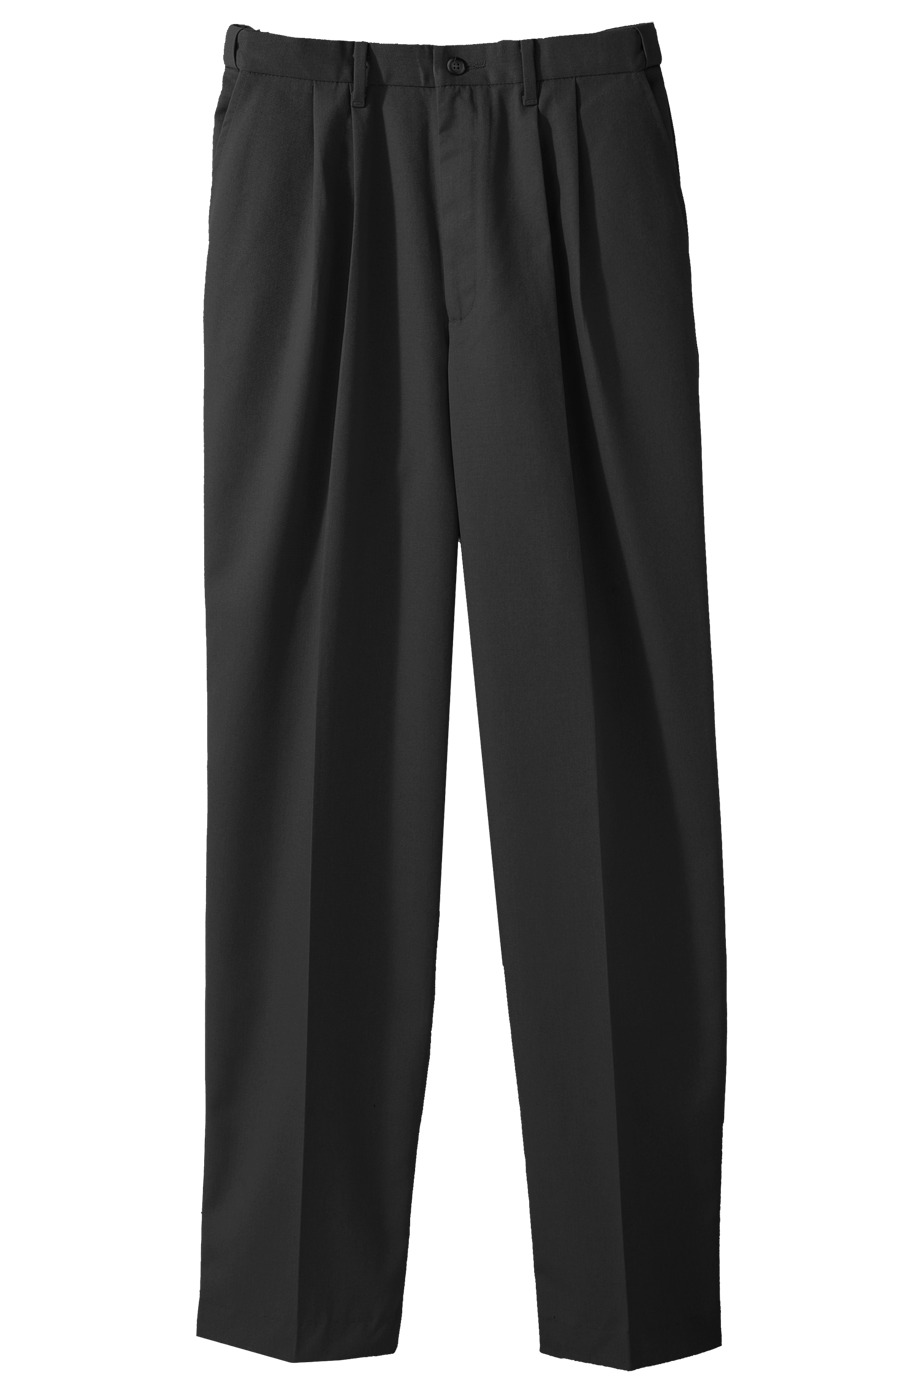 Edwards Garment 2678 - Men's Easy Fit Chino Pleated Pant